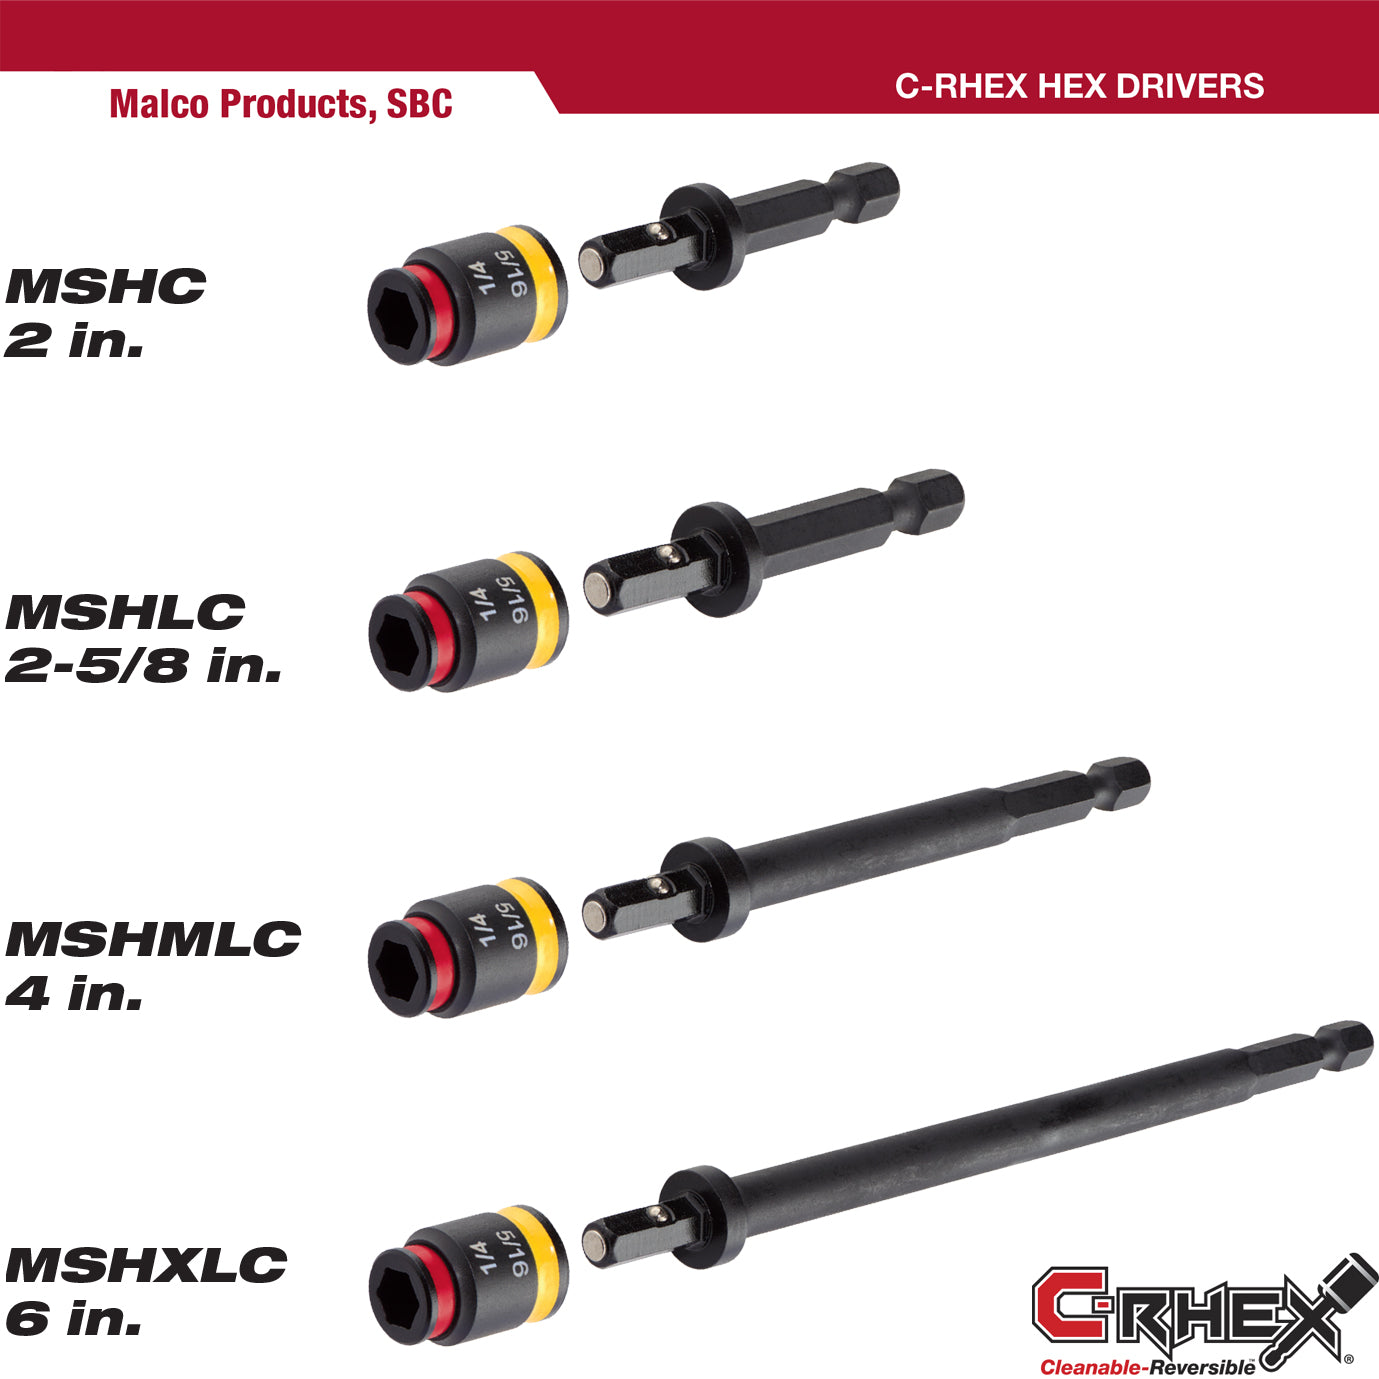 MSHLC - C-RHEX Cleanable, Reversible Magnetic Hex Drivers, 1/4" and 5/16", 2-5/8" Length